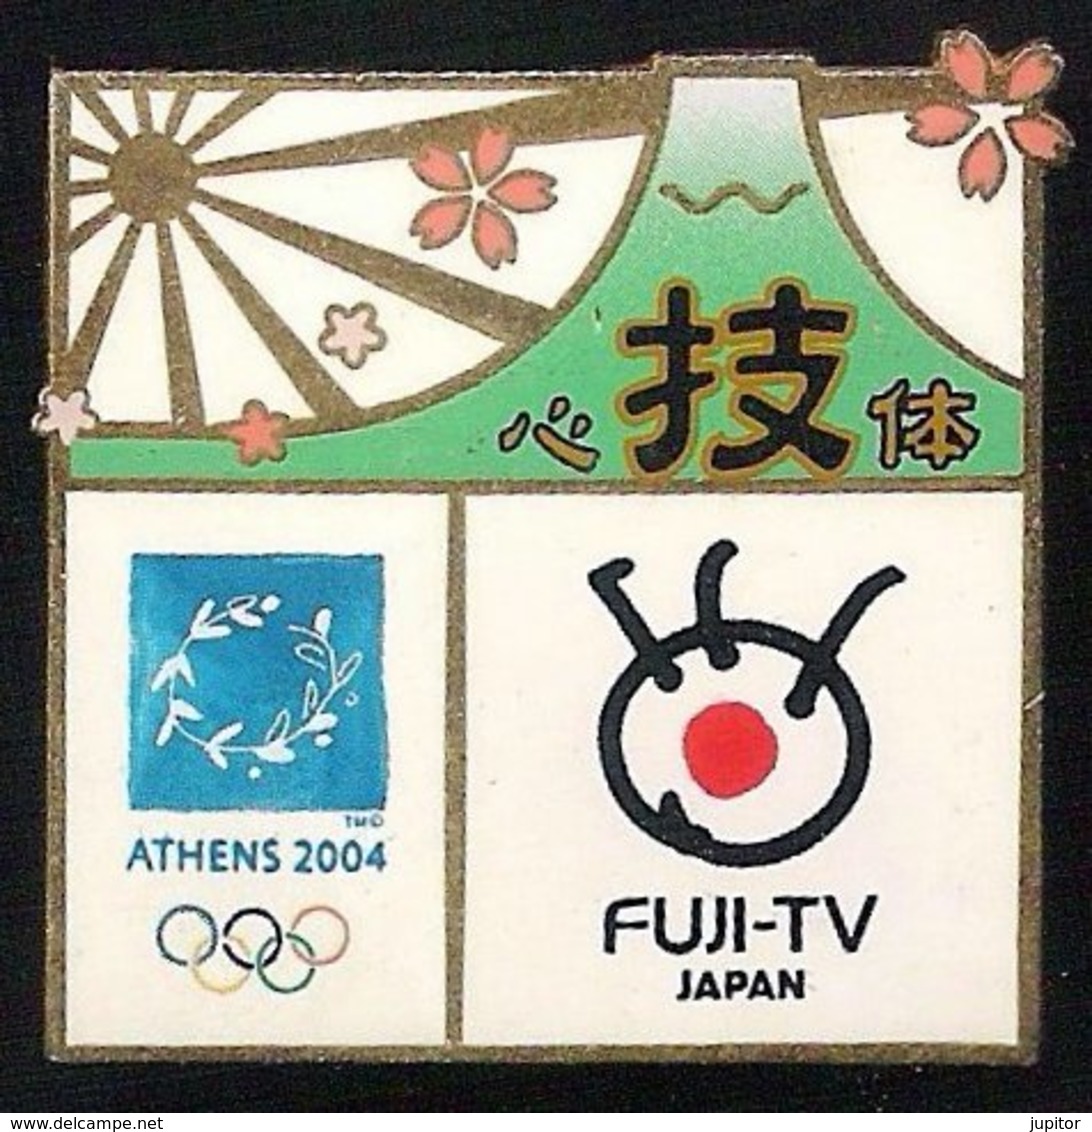 Olympic Games Greece Athens 2004 PIN With Japan Broadcaster FUGI-TV - Olympic Games